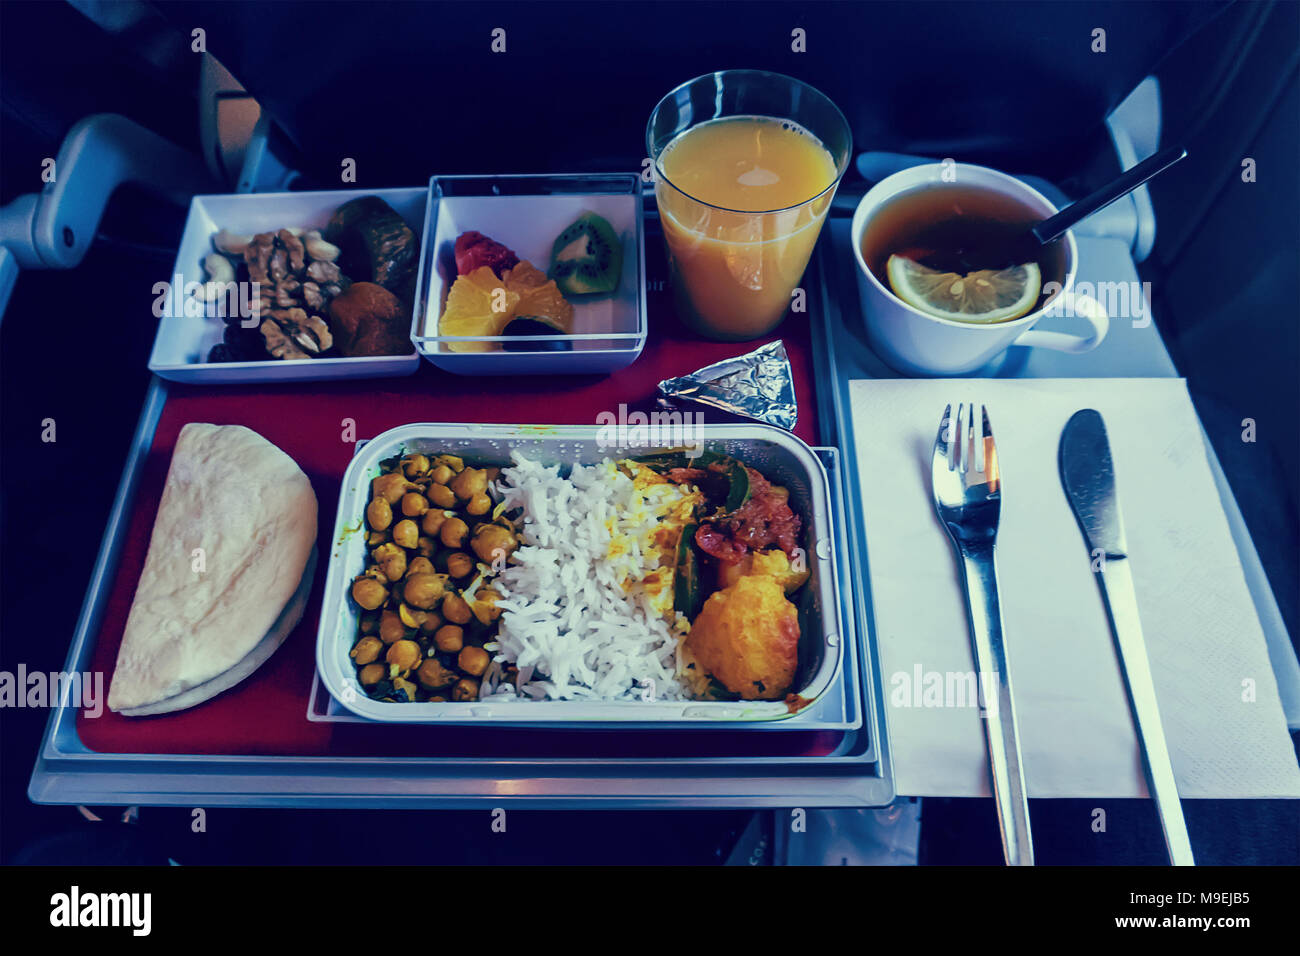 First Class Travel. a large set of meals provided by the airline for long-distance passengers during the flight. Stock Photo